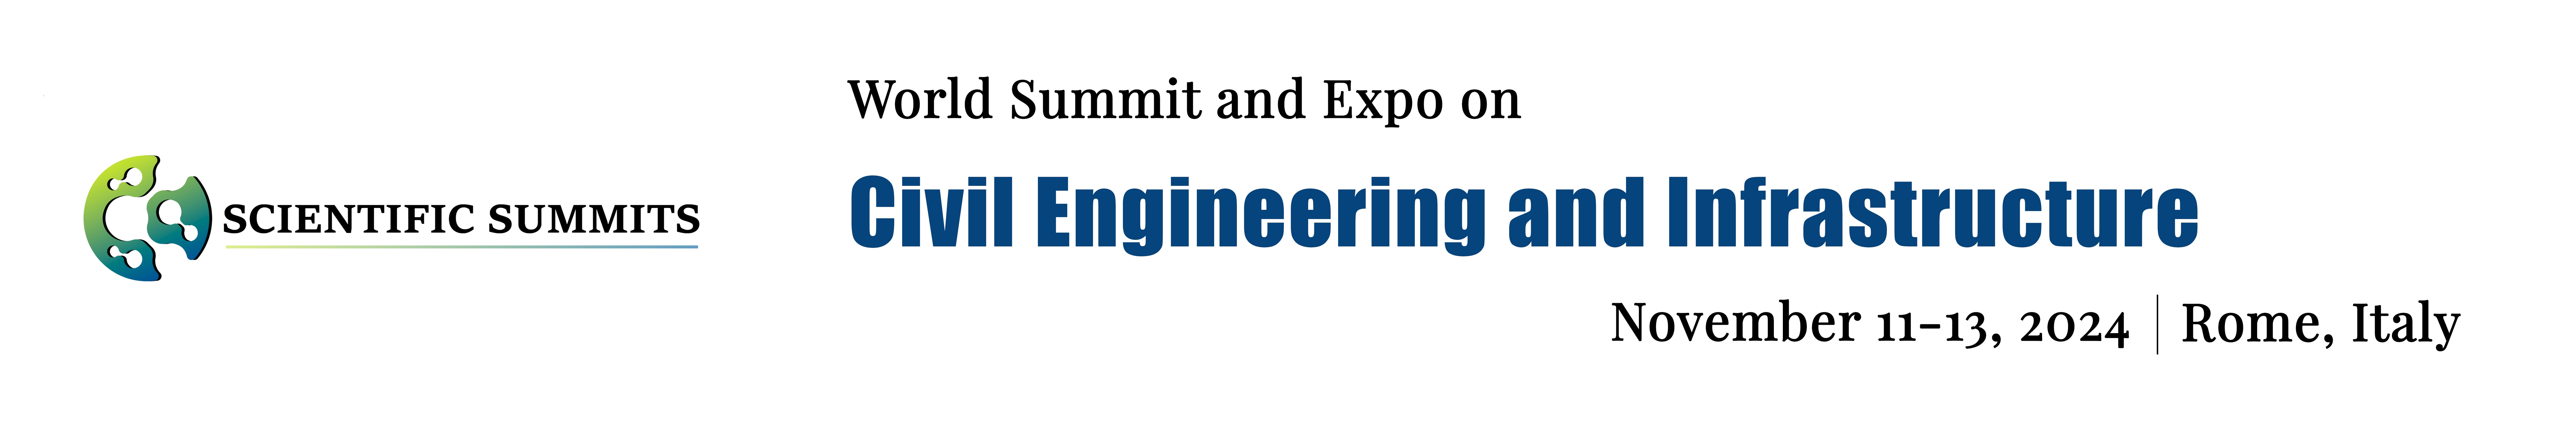 World Summit and Expo on Civil Engineering and Infrastructure